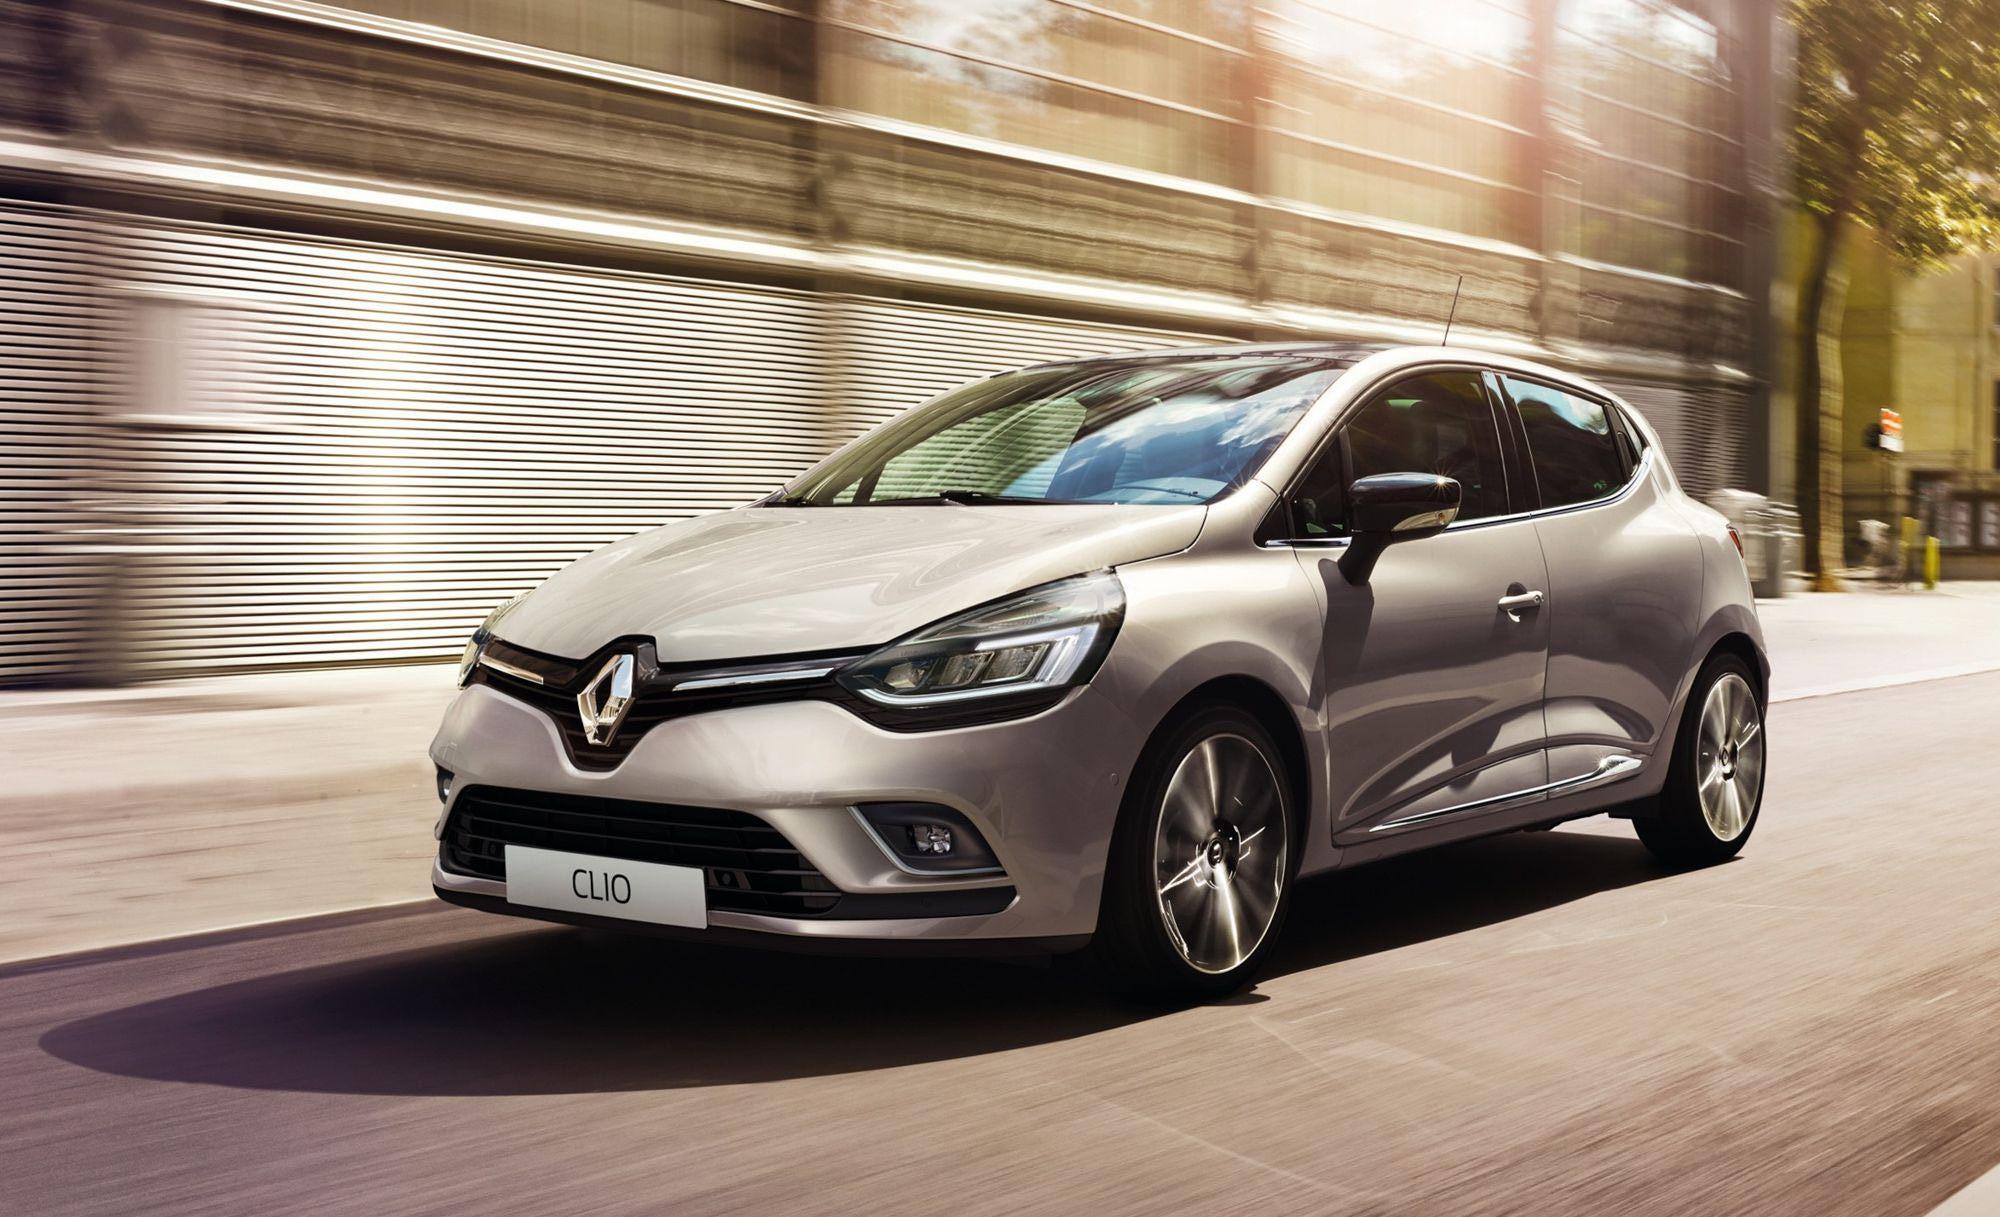 RENAULT CLIO MOTION WALLPAPERS